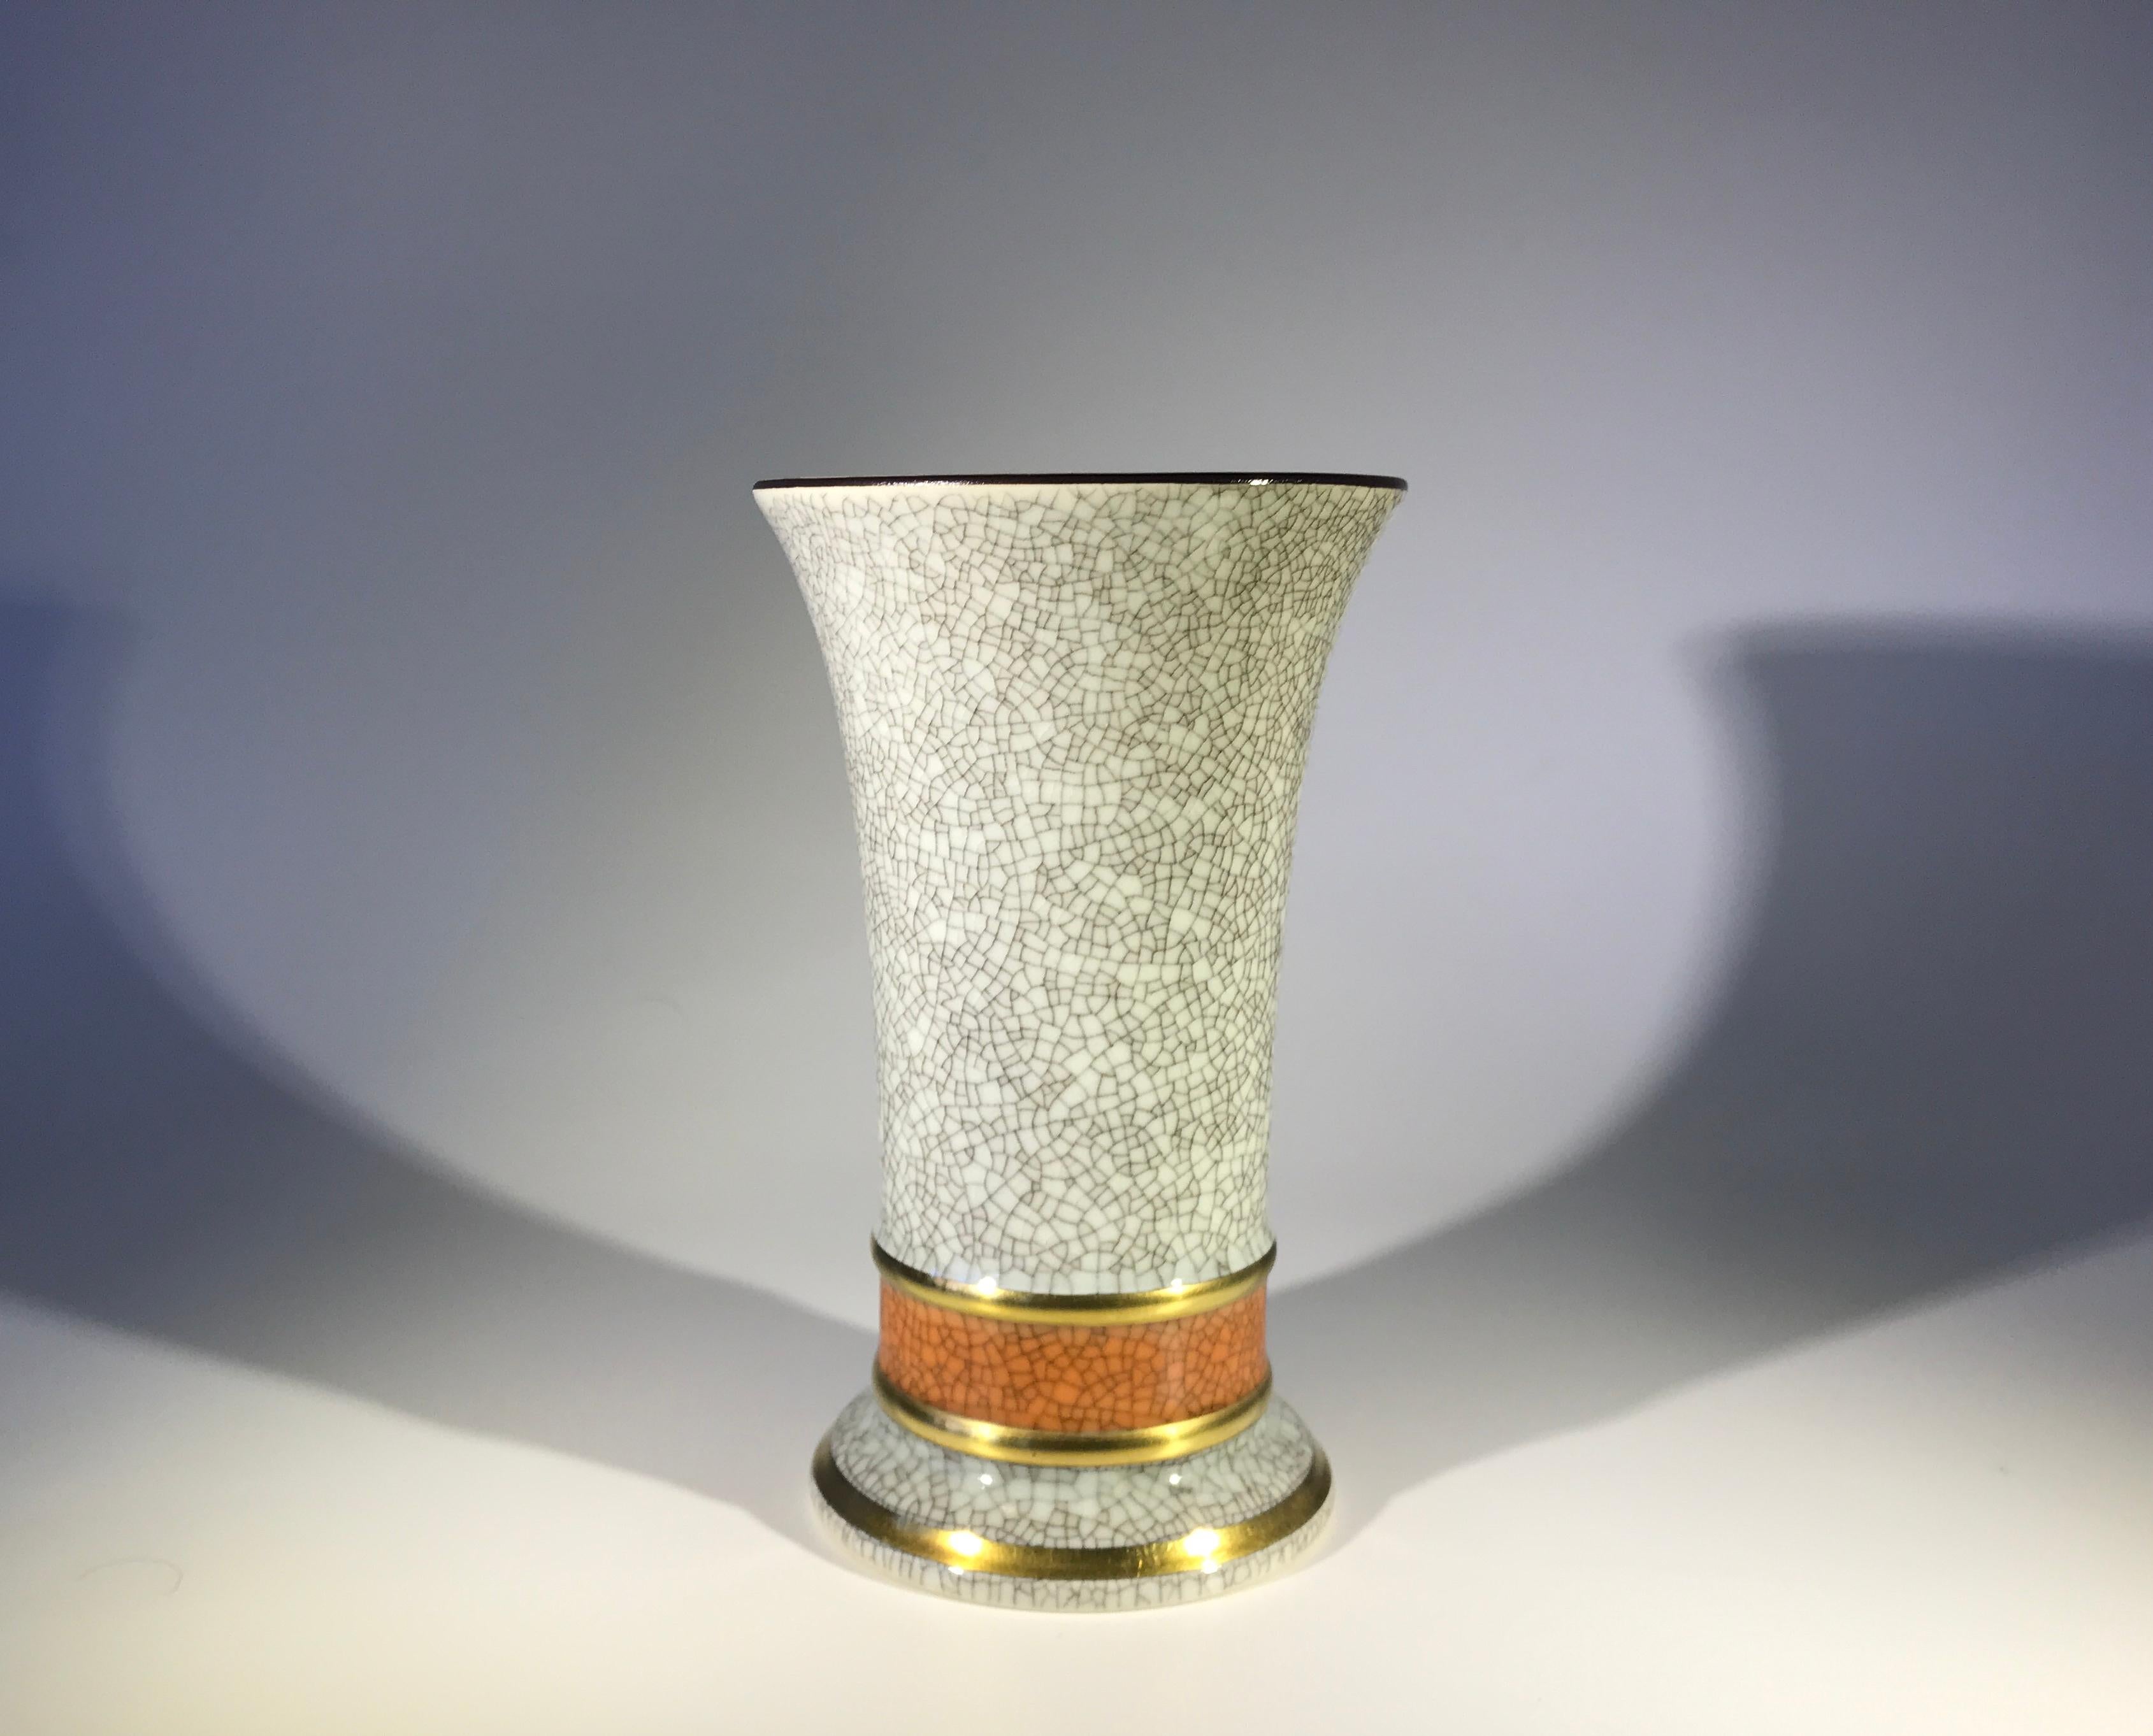 Royal Copenhagen of Denmark, porcelain fluted grey crackle glazed vase with terracotta and gilded banded decoration,
circa 1961
Made in Denmark
Stamped and numbered 3462
Measures: Height 5.5 inch, diameter 3.25 inch approximate
Very good